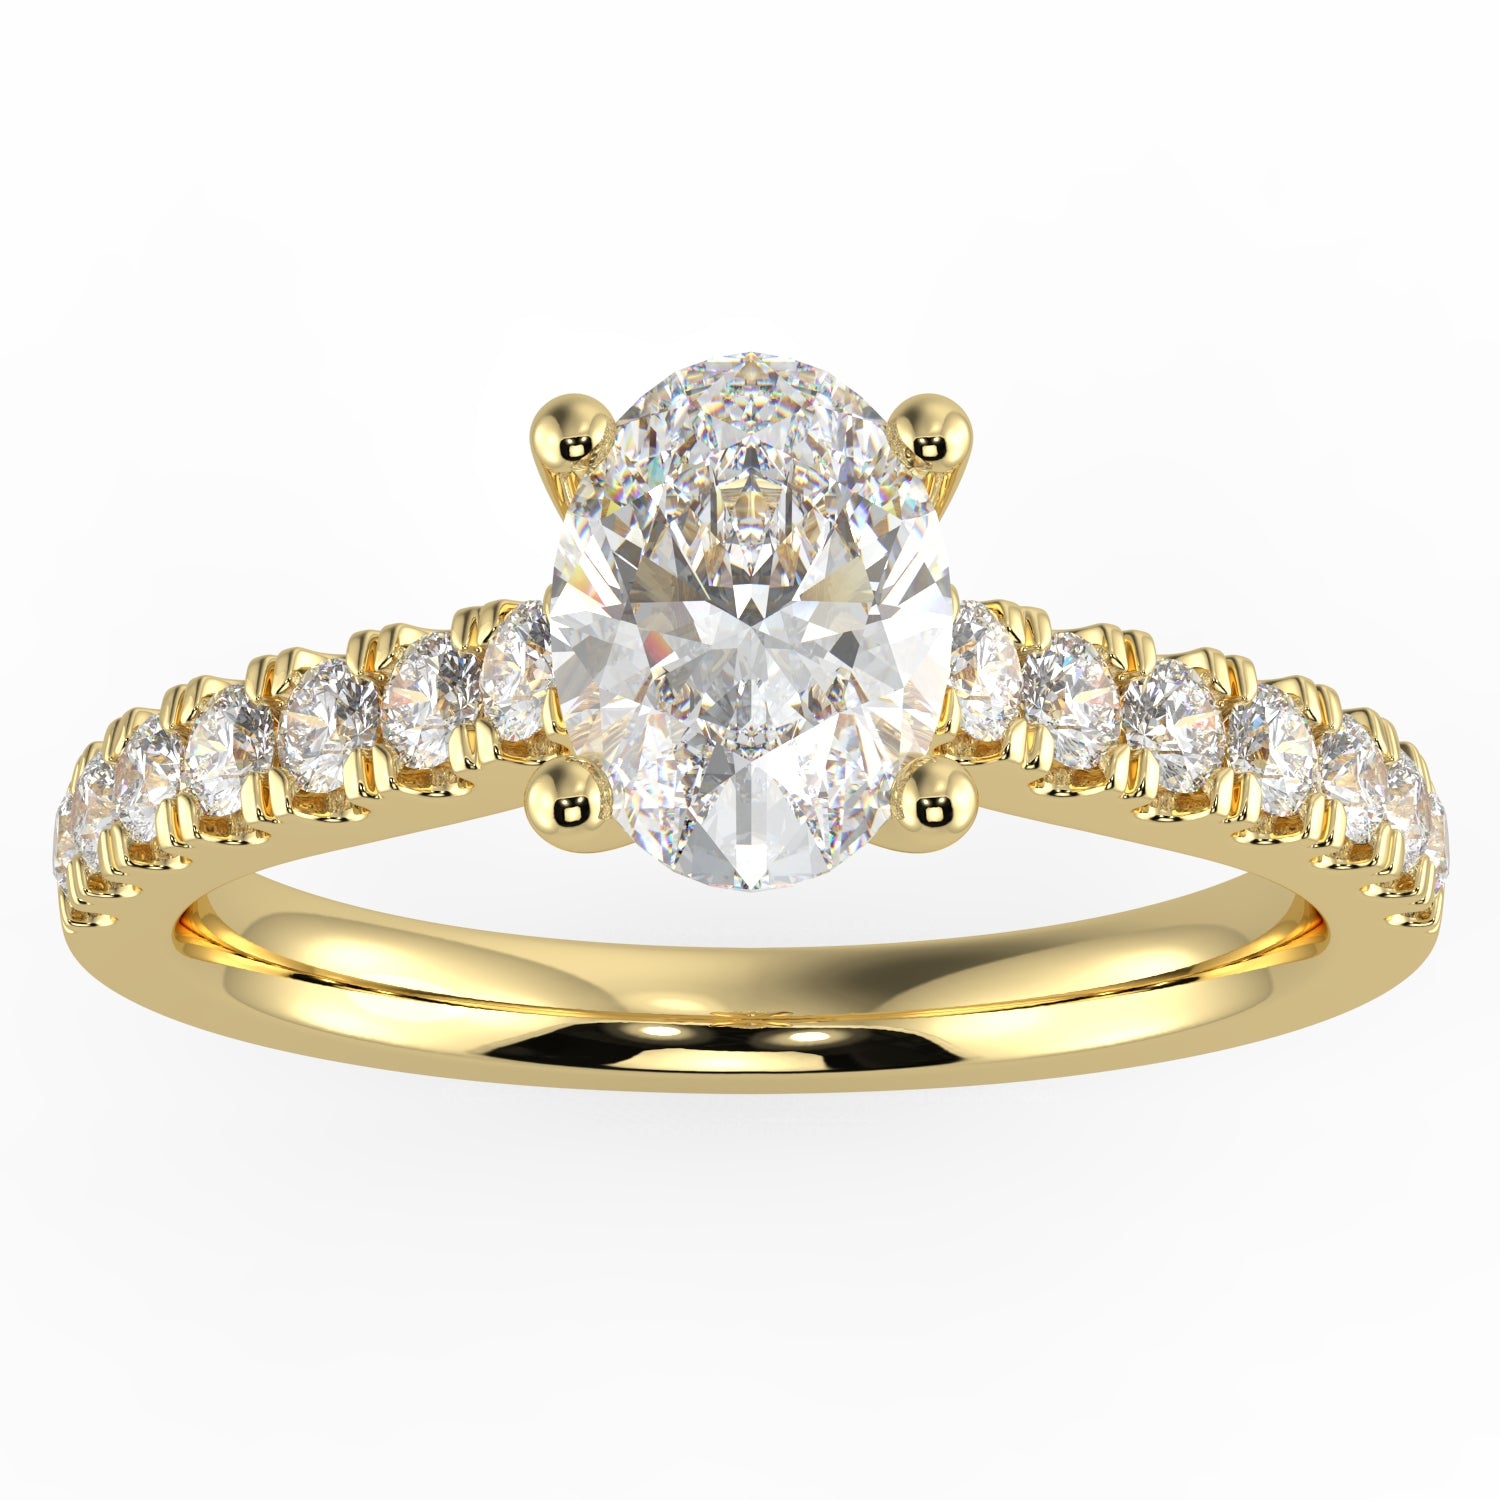 Natural Diamond Slim Shank Ring with 0.70ctw Oval Shape Center & 0.30 Round Side GHS1 Stones Set on 14K Gold